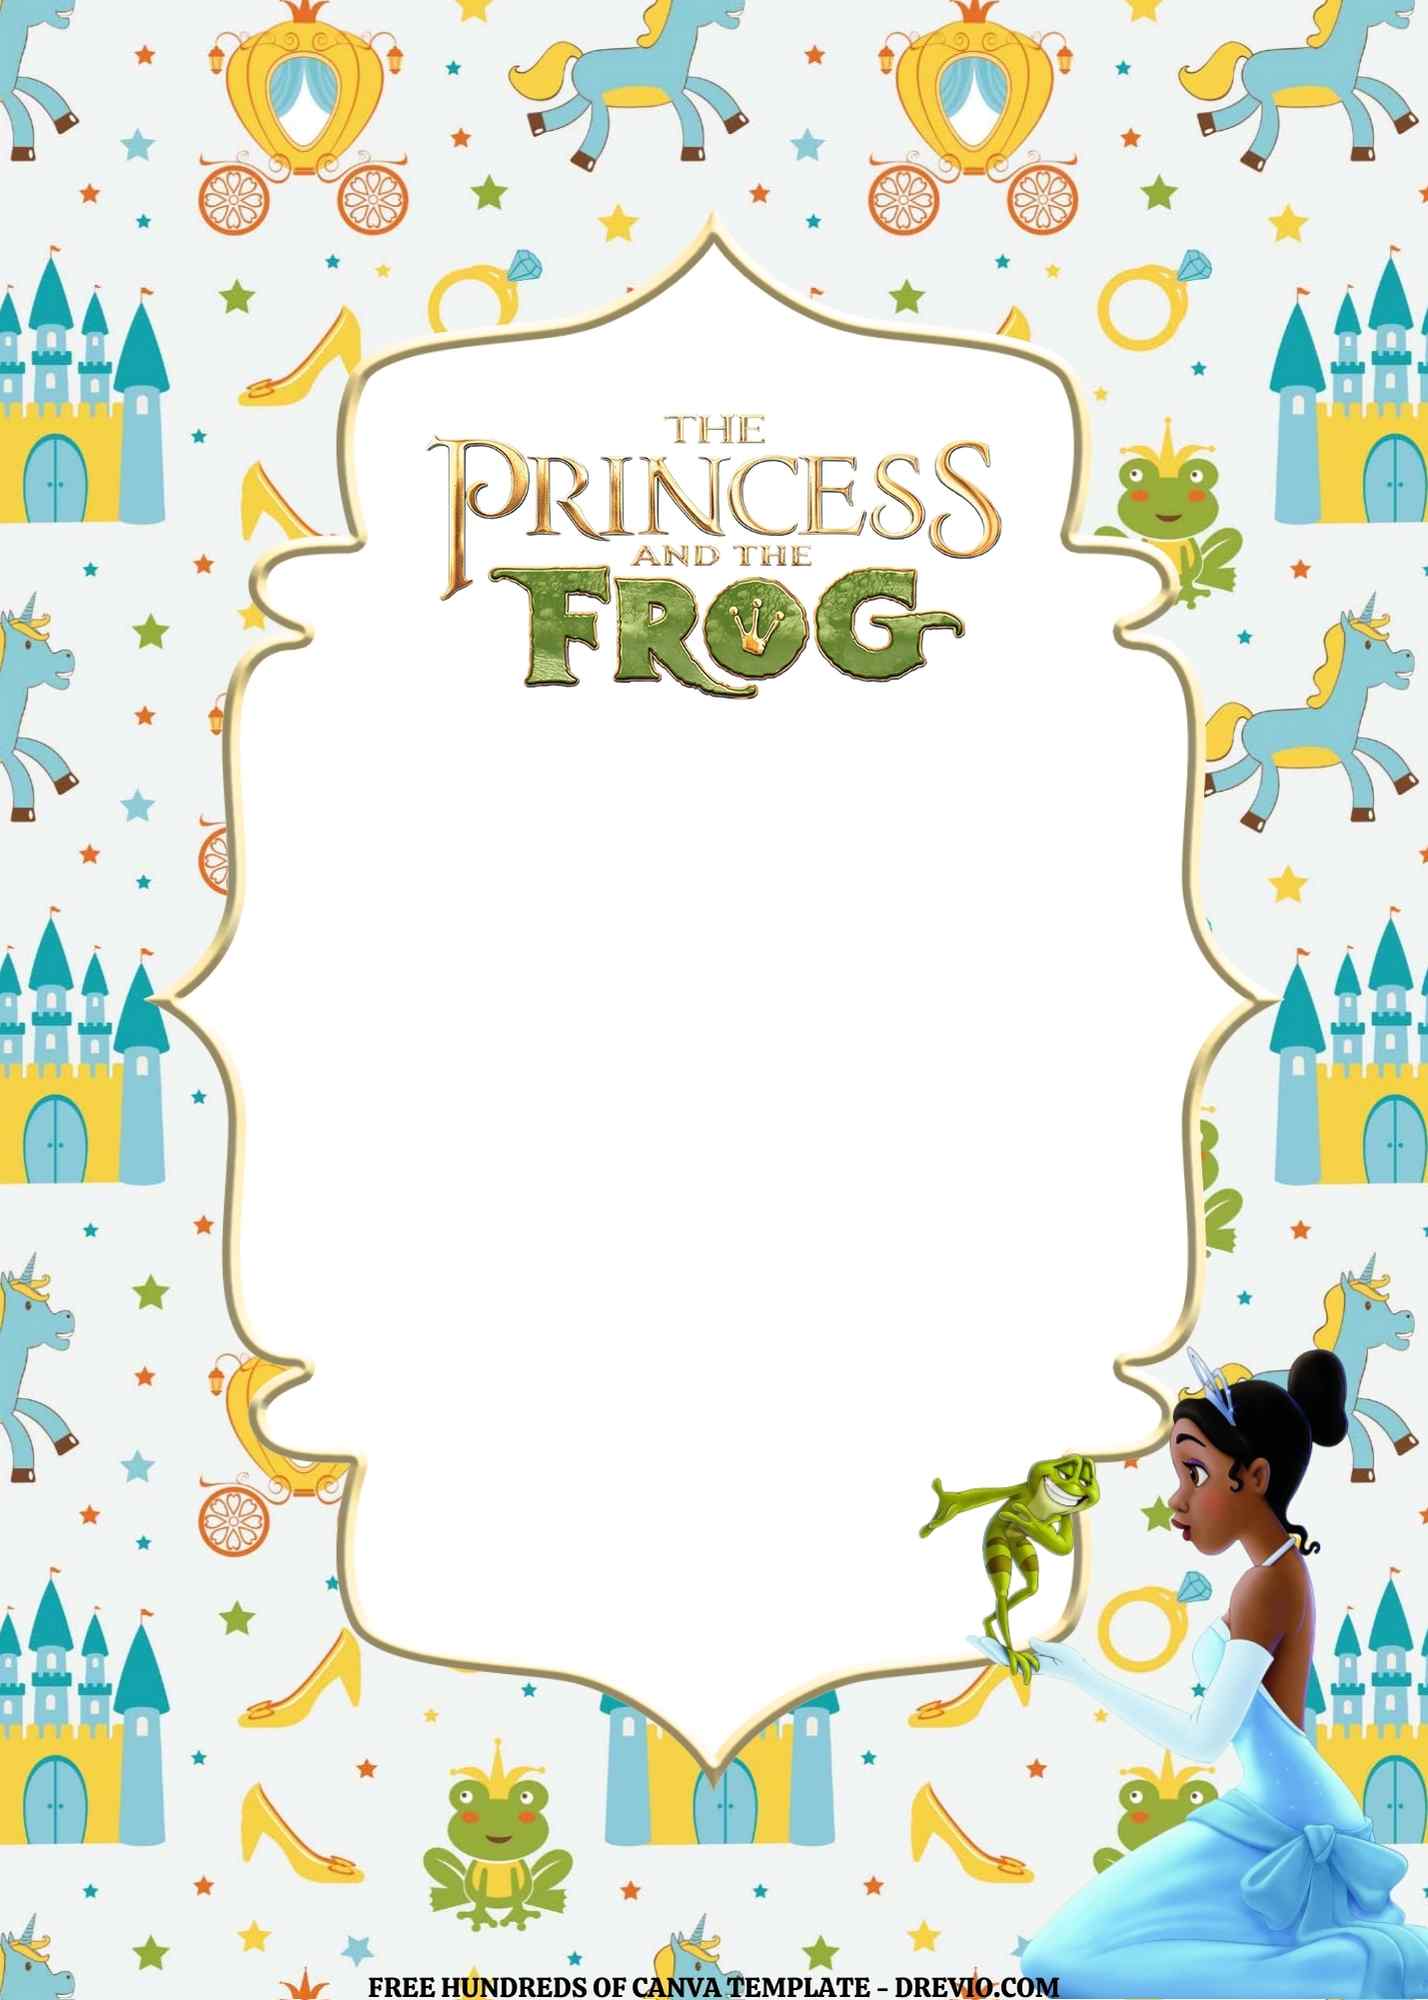 The Princess and the Frog' gave black girls their first taste of